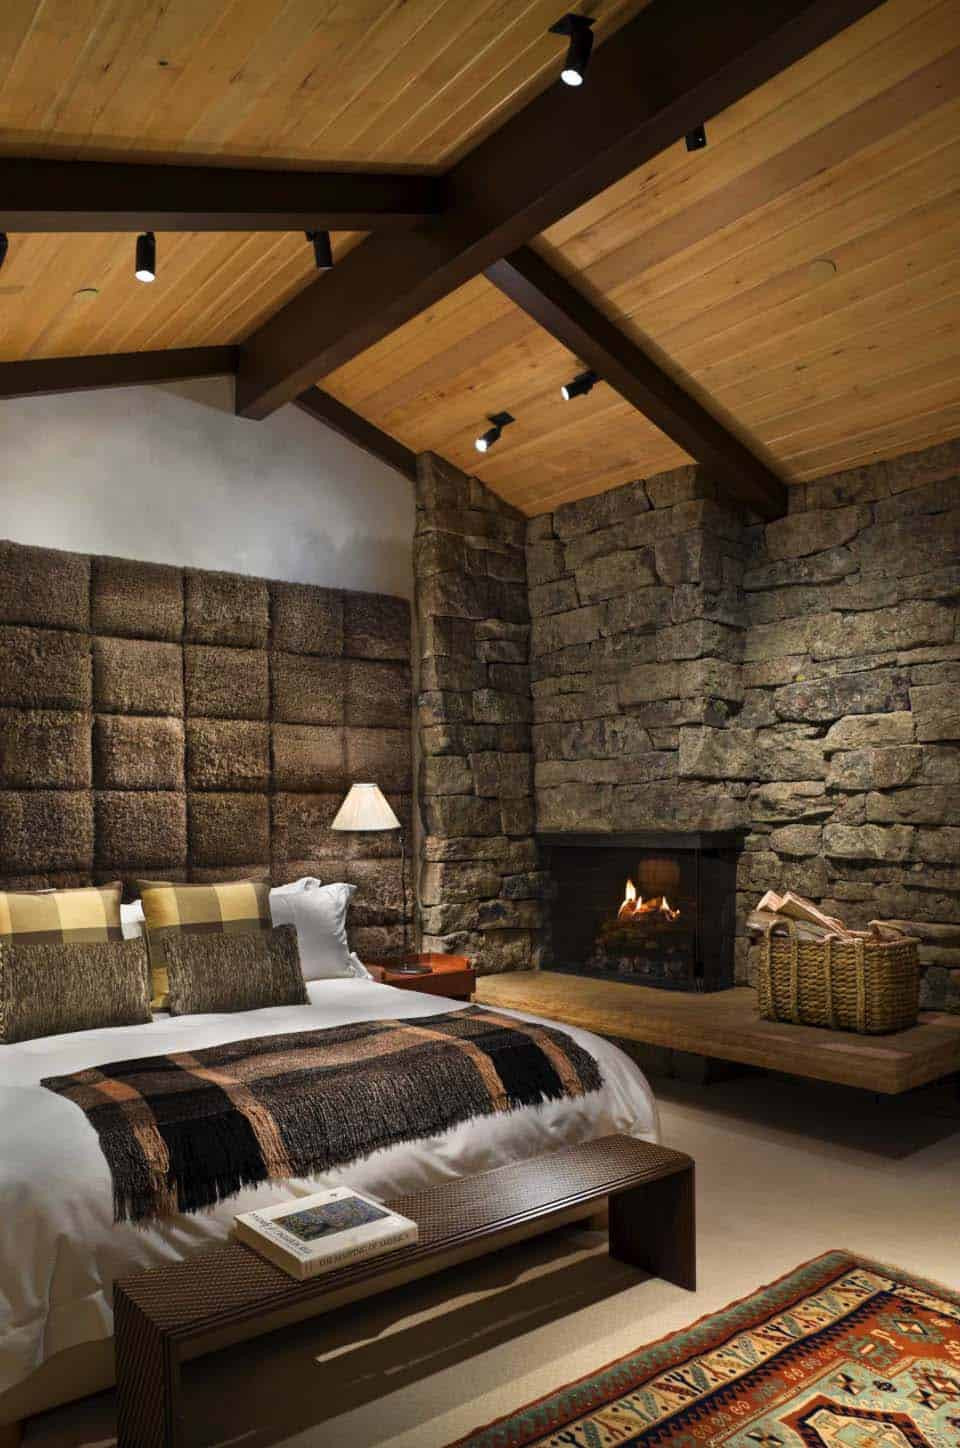 Rustic Master Bedroom Ideas
 40 Amazing rustic bedrooms styled to feel like a cozy away